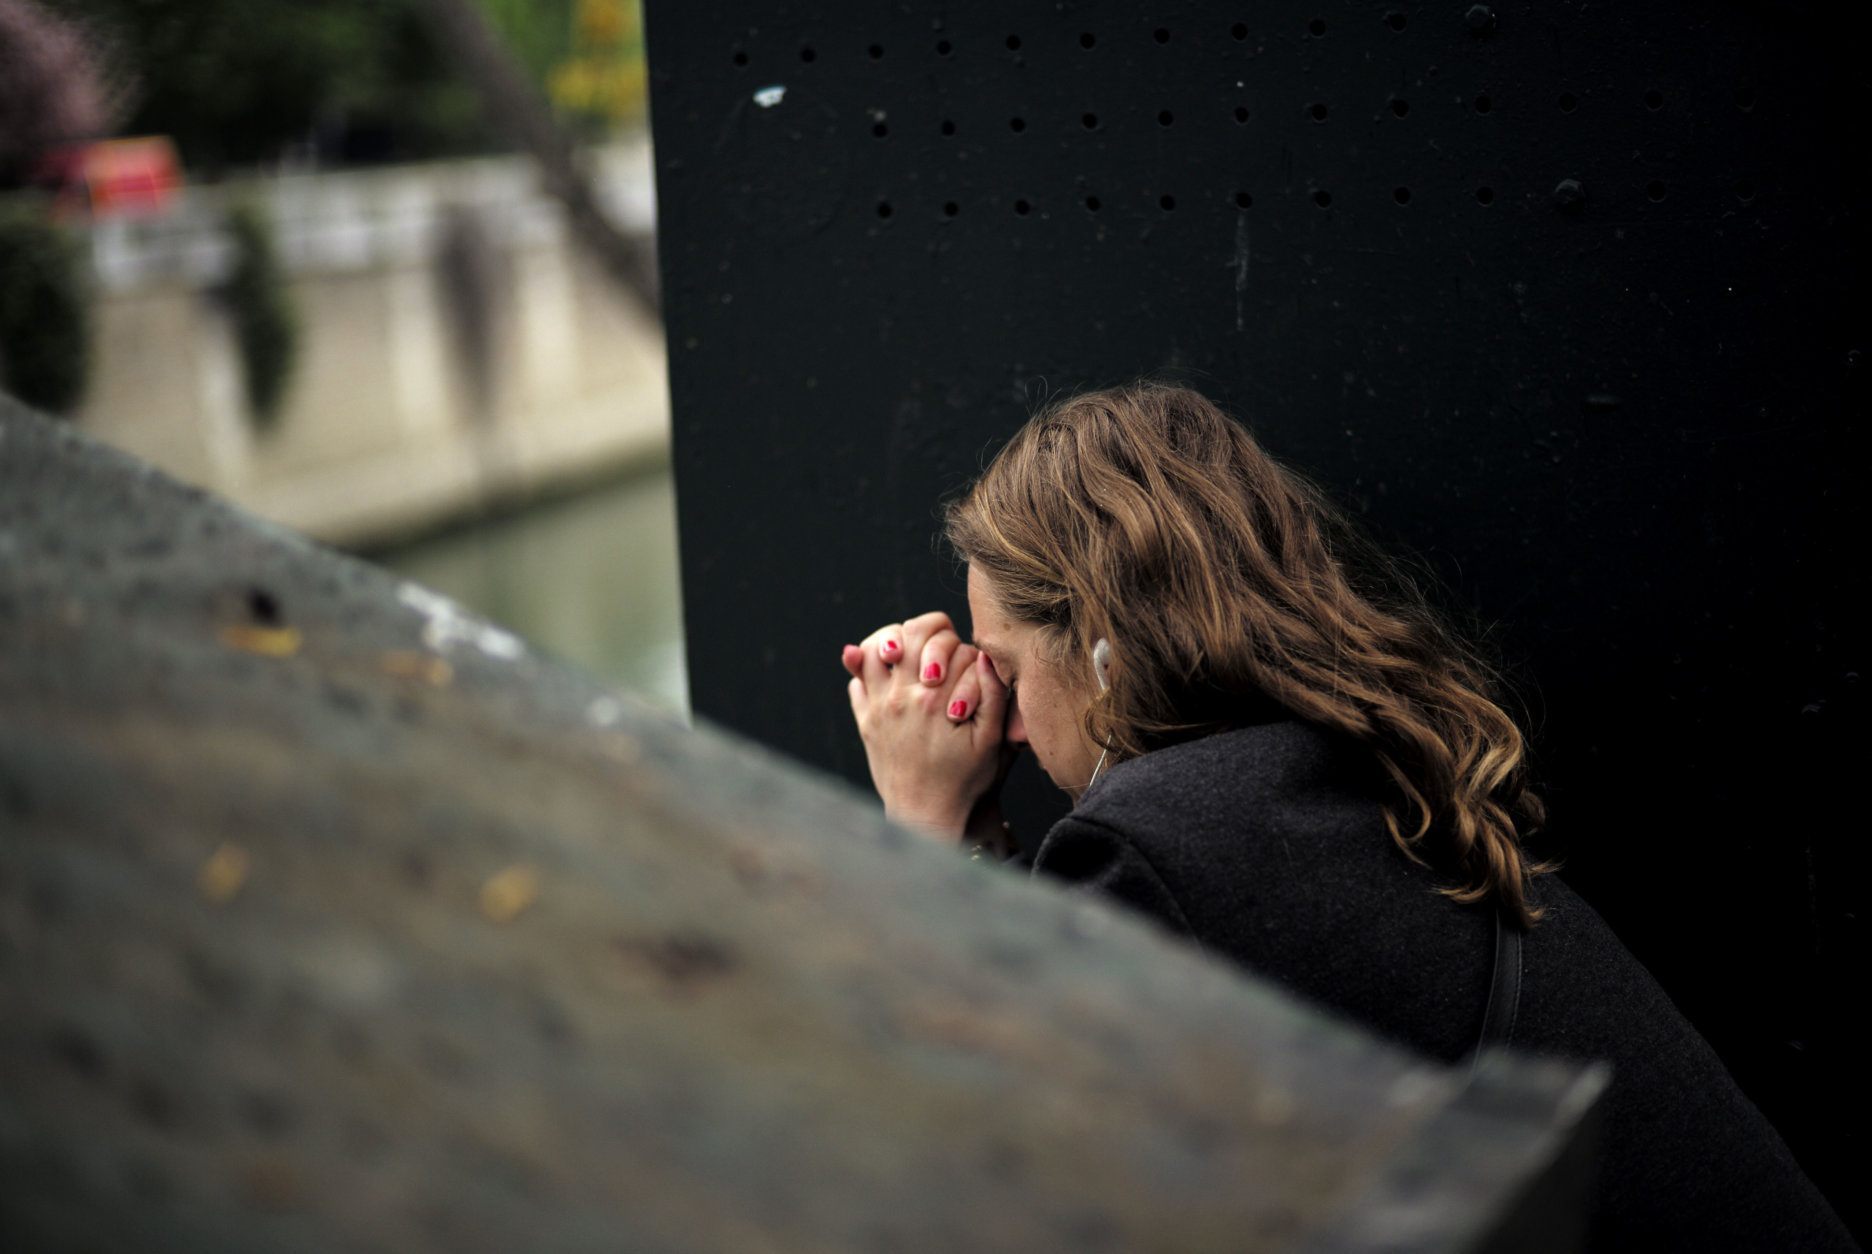 A woman sits in despair near the Notre Dame cathedral after the fire in Paris, Tuesday, April 16, 2019. A catastrophic fire engulfed the upper reaches of Paris' soaring Notre Dame Cathedral as it was undergoing renovations Monday, threatening one of the greatest architectural treasures of the Western world as tourists and Parisians looked on aghast from the streets below. (AP Photo/Kamil Zihnioglu)